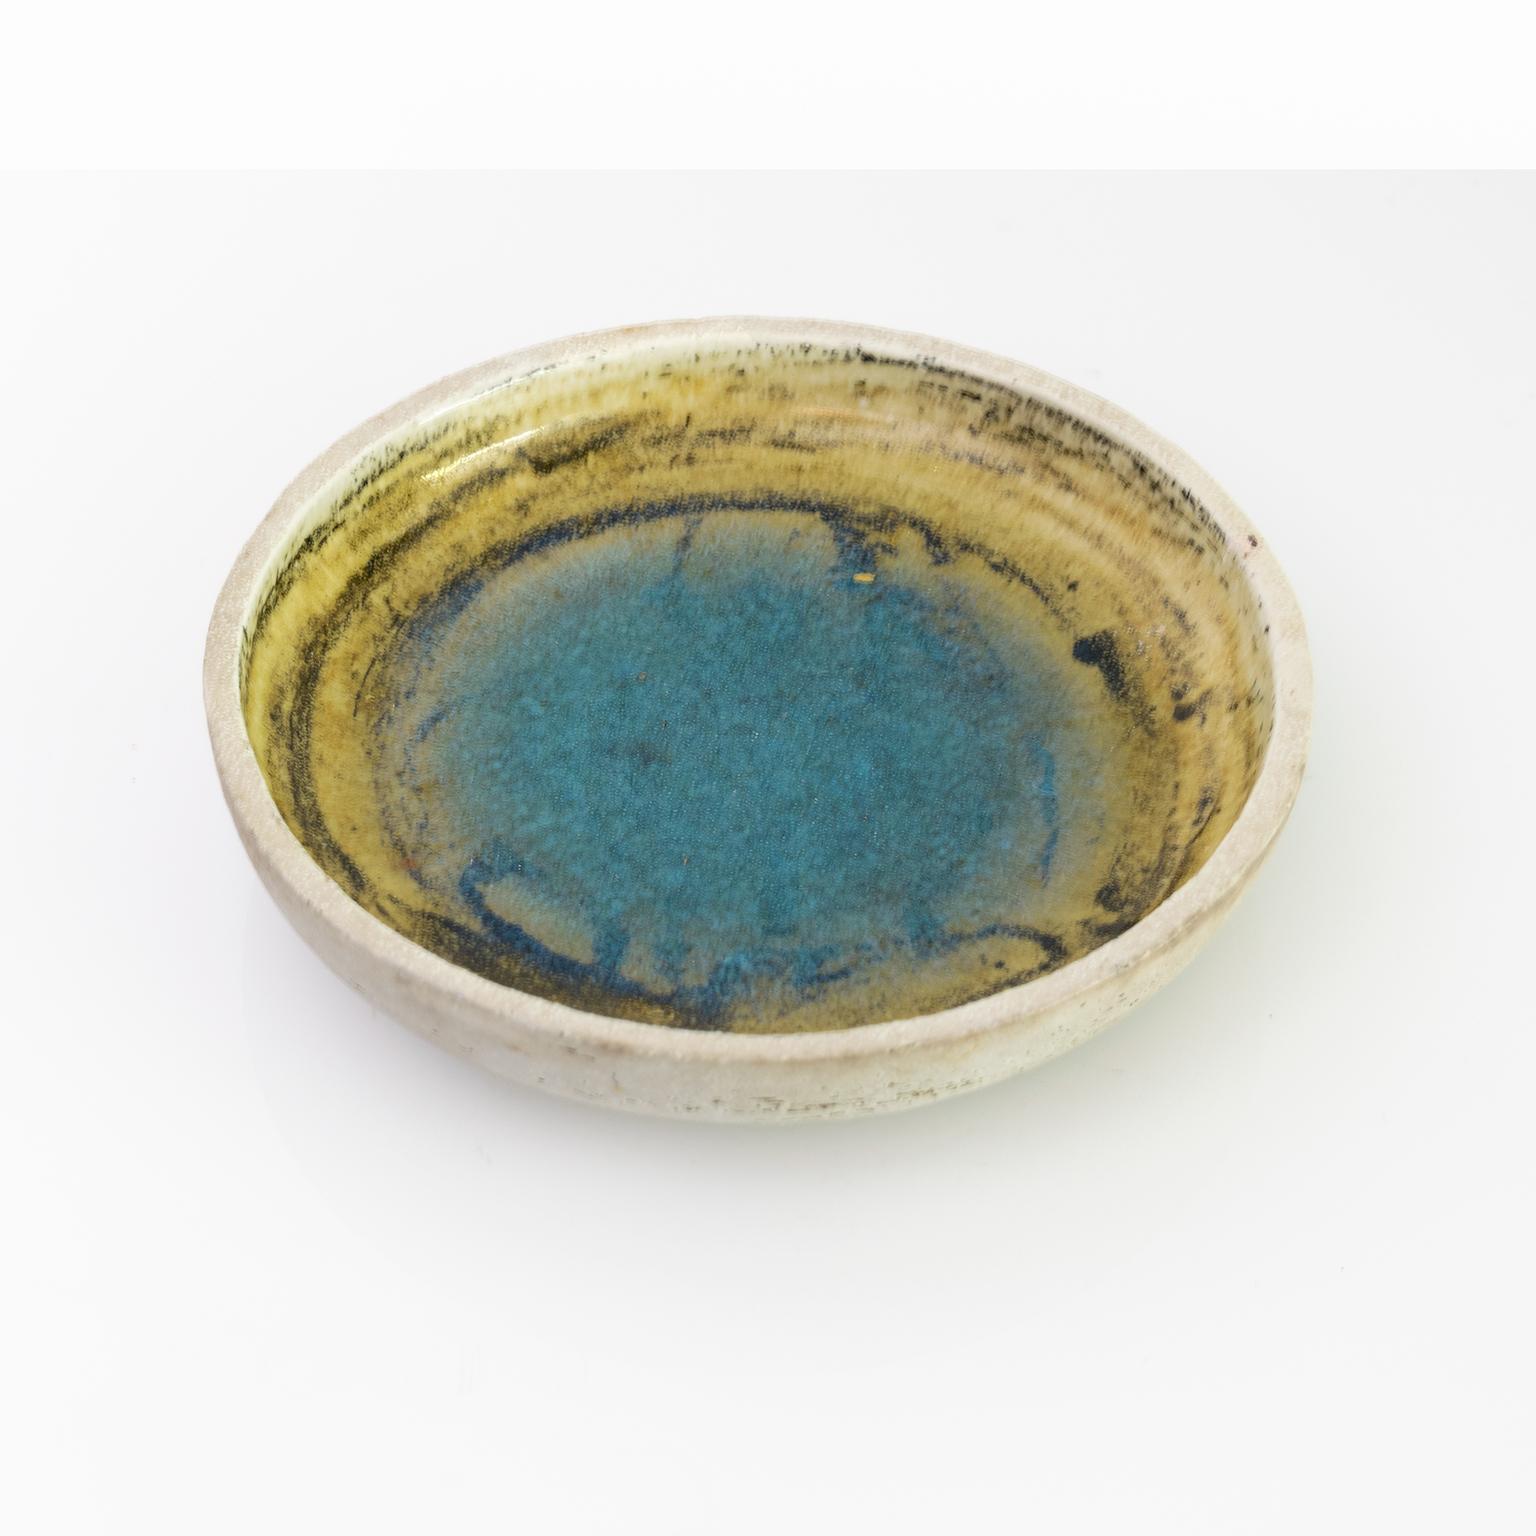 A unique studio bowl by Sylvia Leuchovious with a pool of aqua blue glaze at the center. The bowl is hand thrown and made of charmotte clay. Made at Gustavsberg, circa 1960.

Measures: Diameter: 10“ Height: 2“.